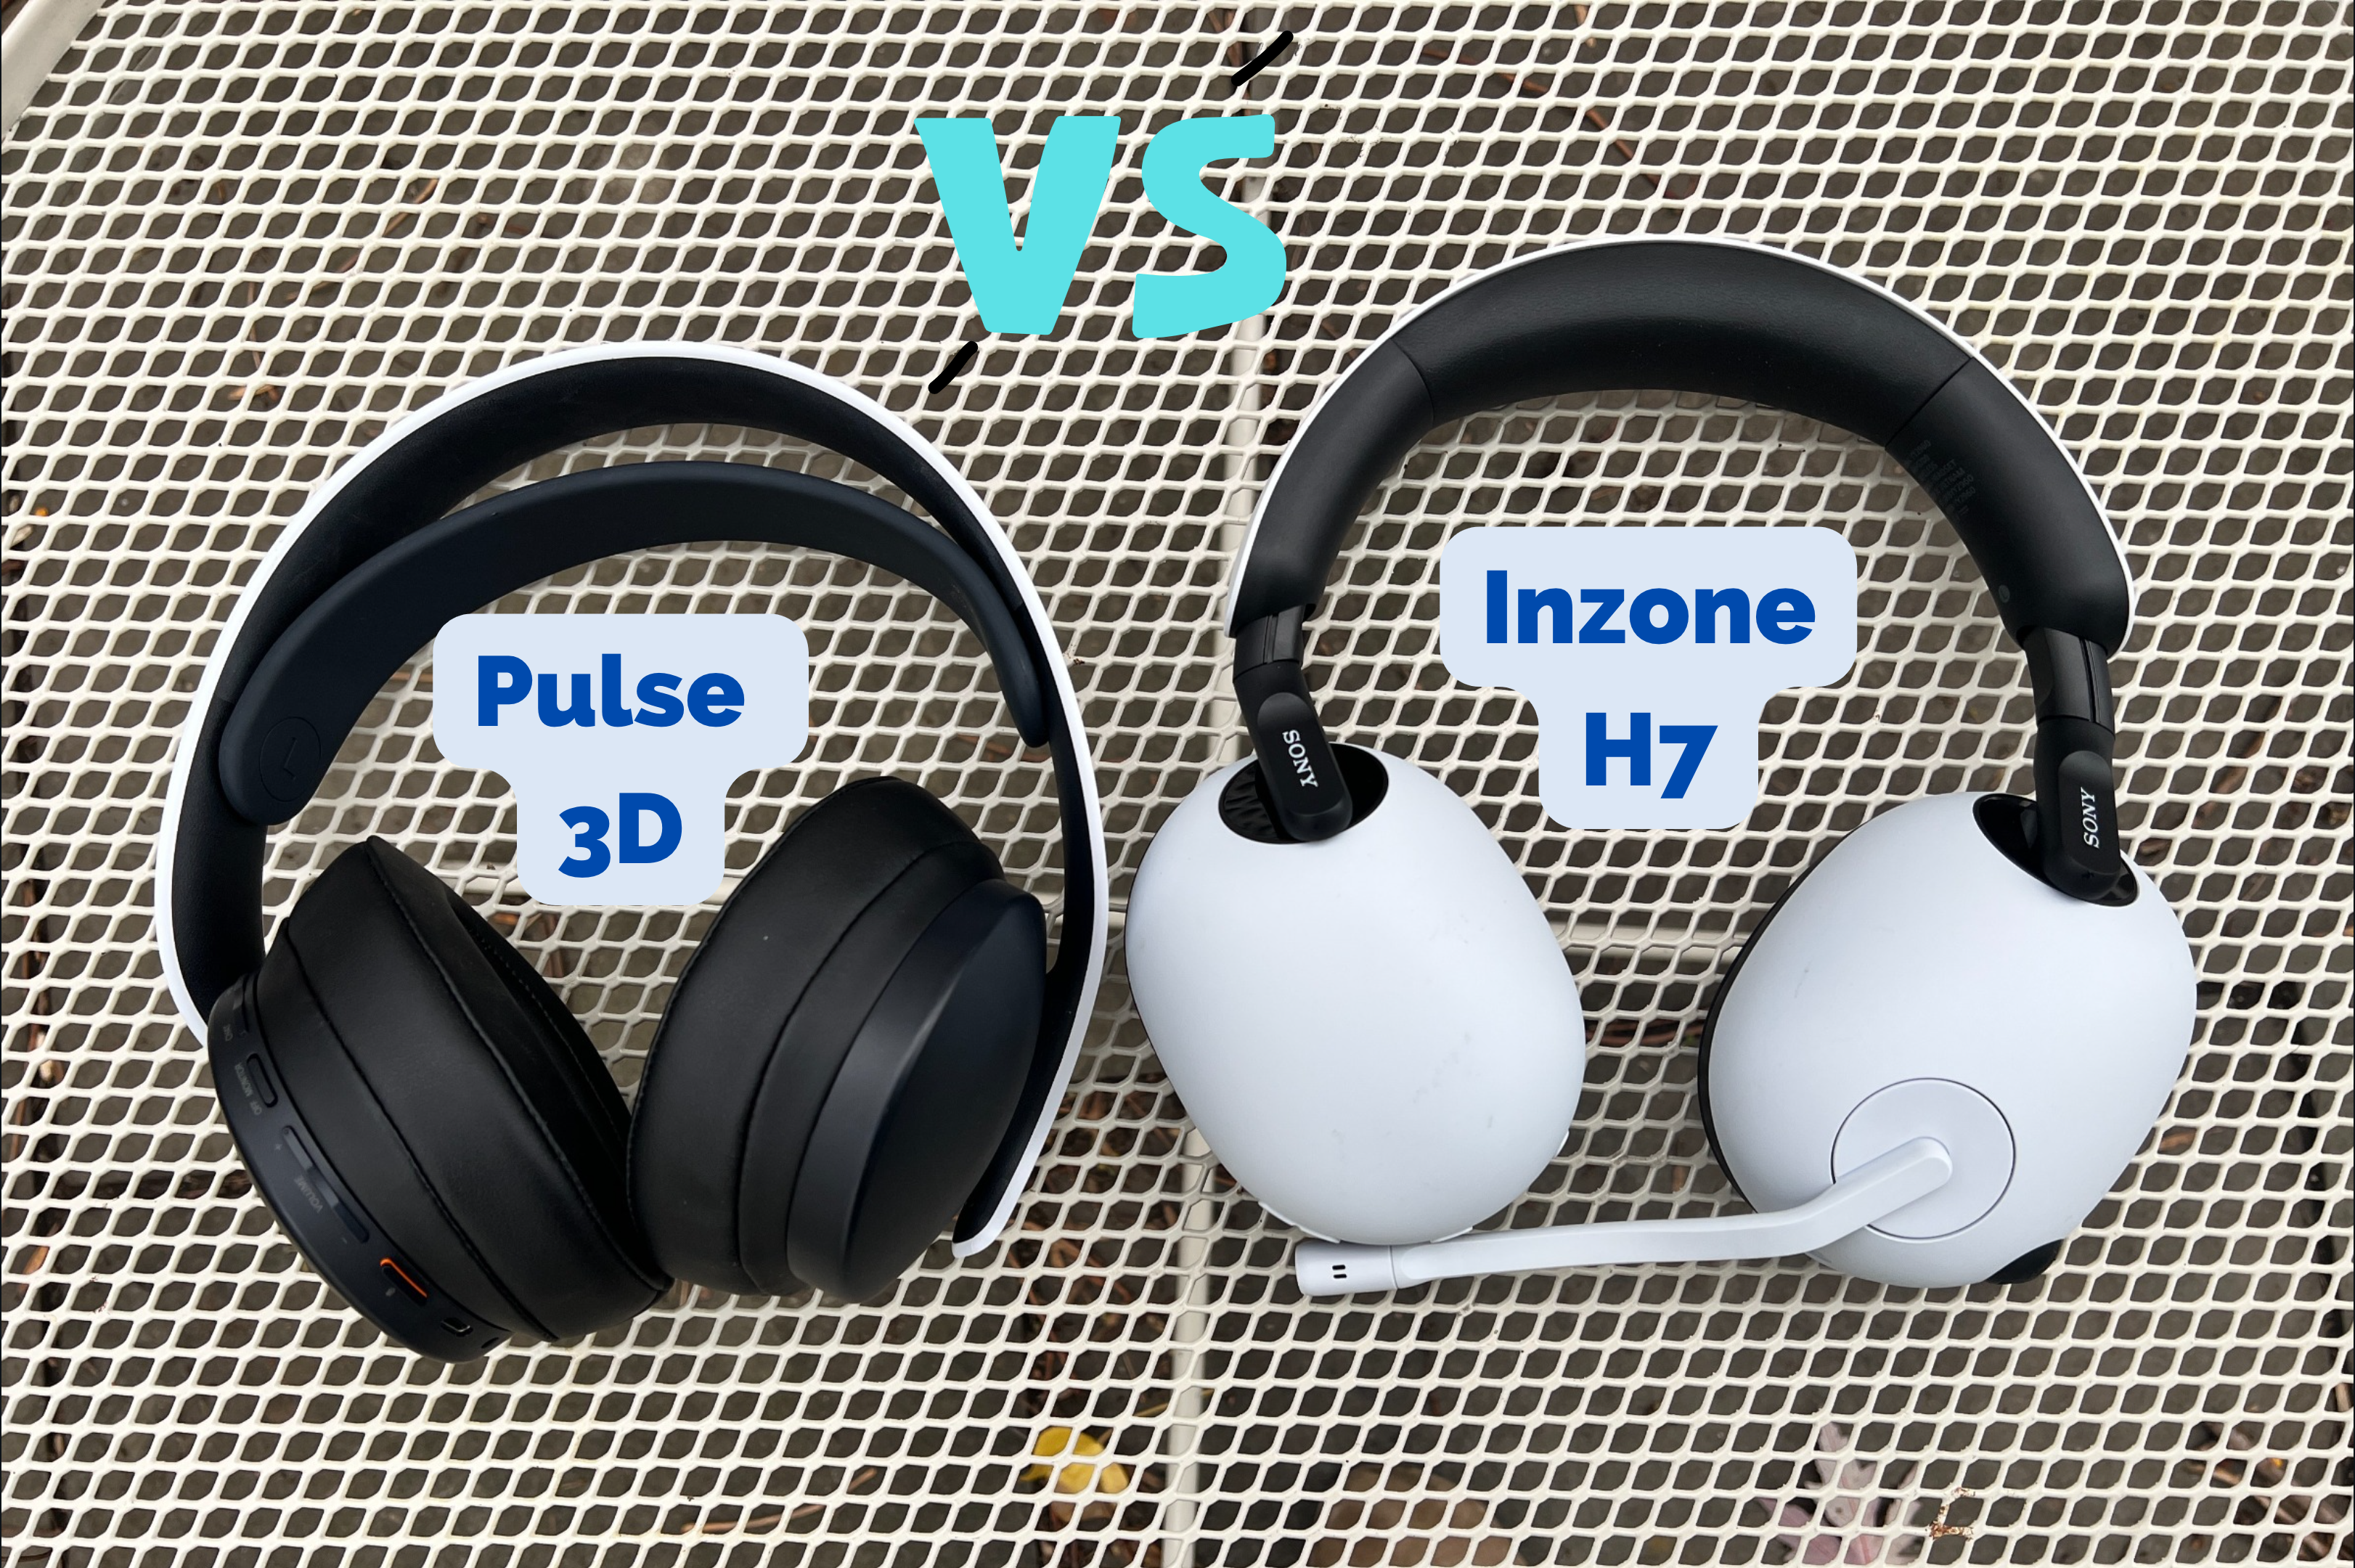 Pulse 3D vs Inzone H7 hands-on review: which PS5 headset is best